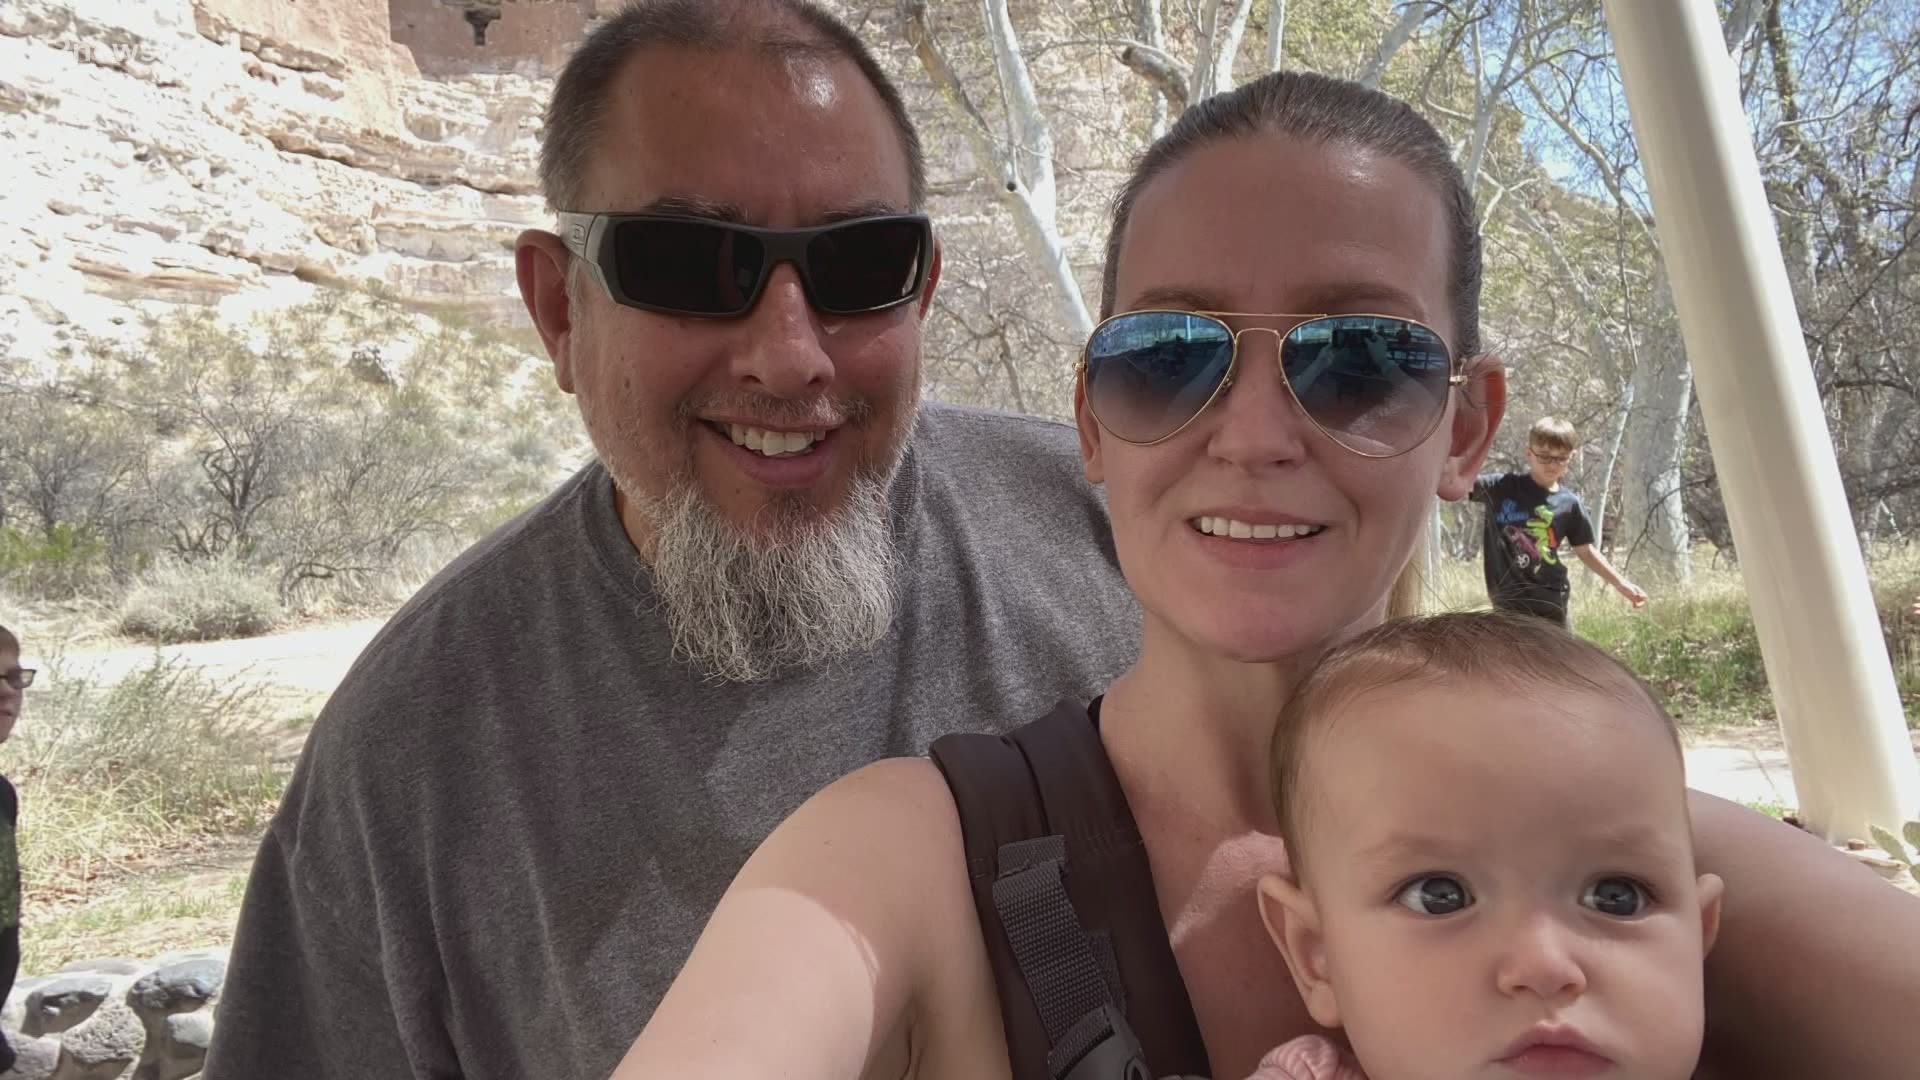 Trisha-Lynne Handy watched as her boyfriend, Leroy Sanders, lost his footing while hiking on Tonto Natural Bridge State Park with their 7-month-old baby girl.